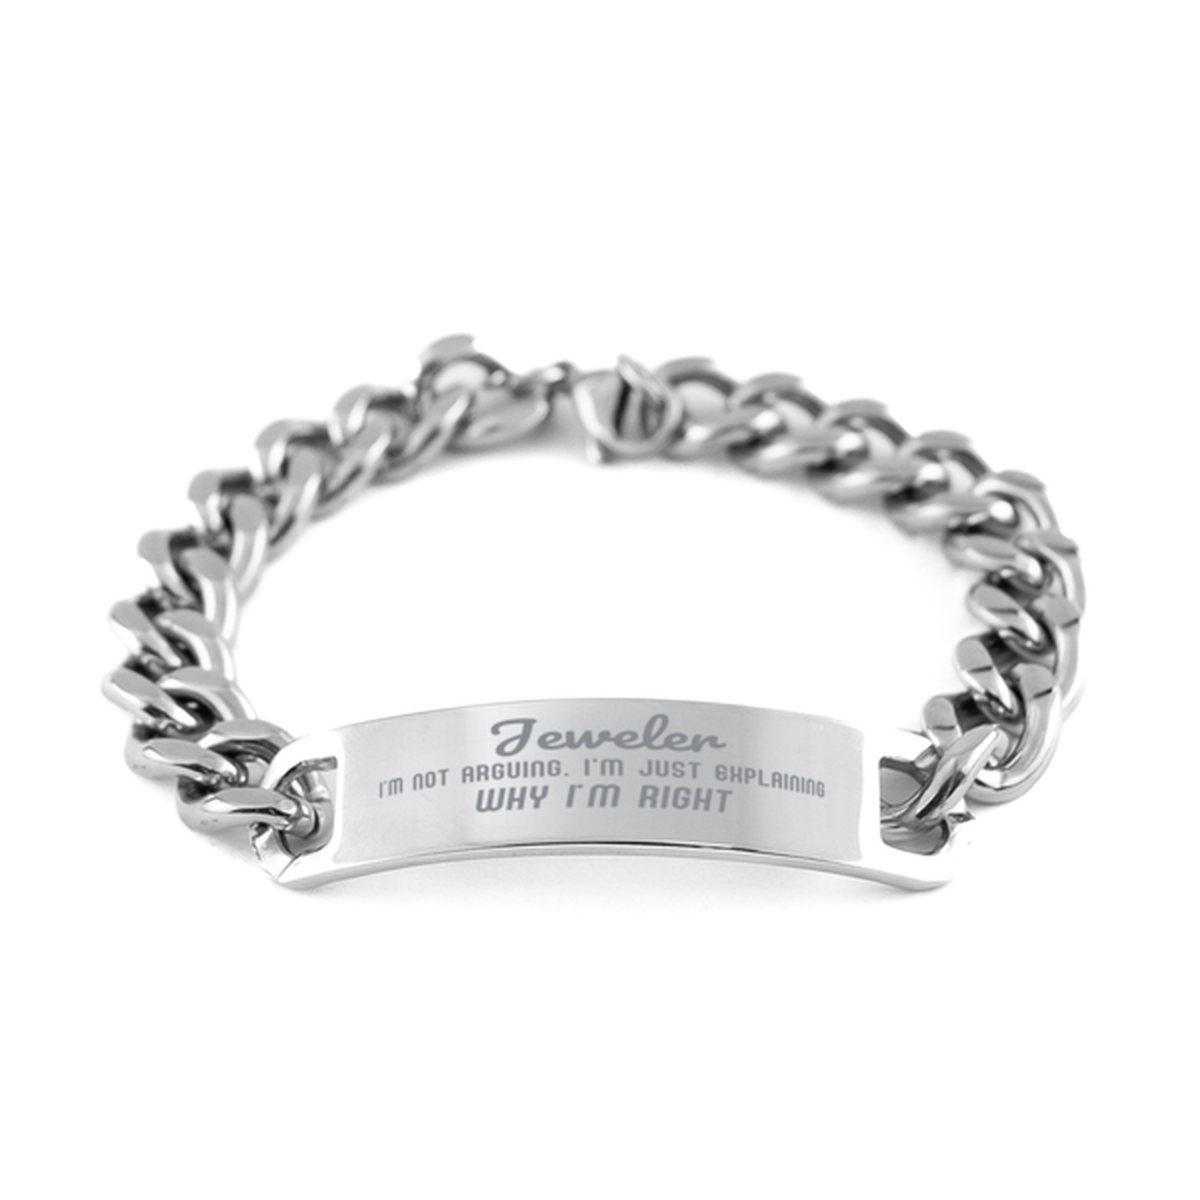 Jeweler I'm not Arguing. I'm Just Explaining Why I'm RIGHT Cuban Chain Stainless Steel Bracelet, Graduation Birthday Christmas Jeweler Gifts For Jeweler Funny Saying Quote Present for Men Women Coworker